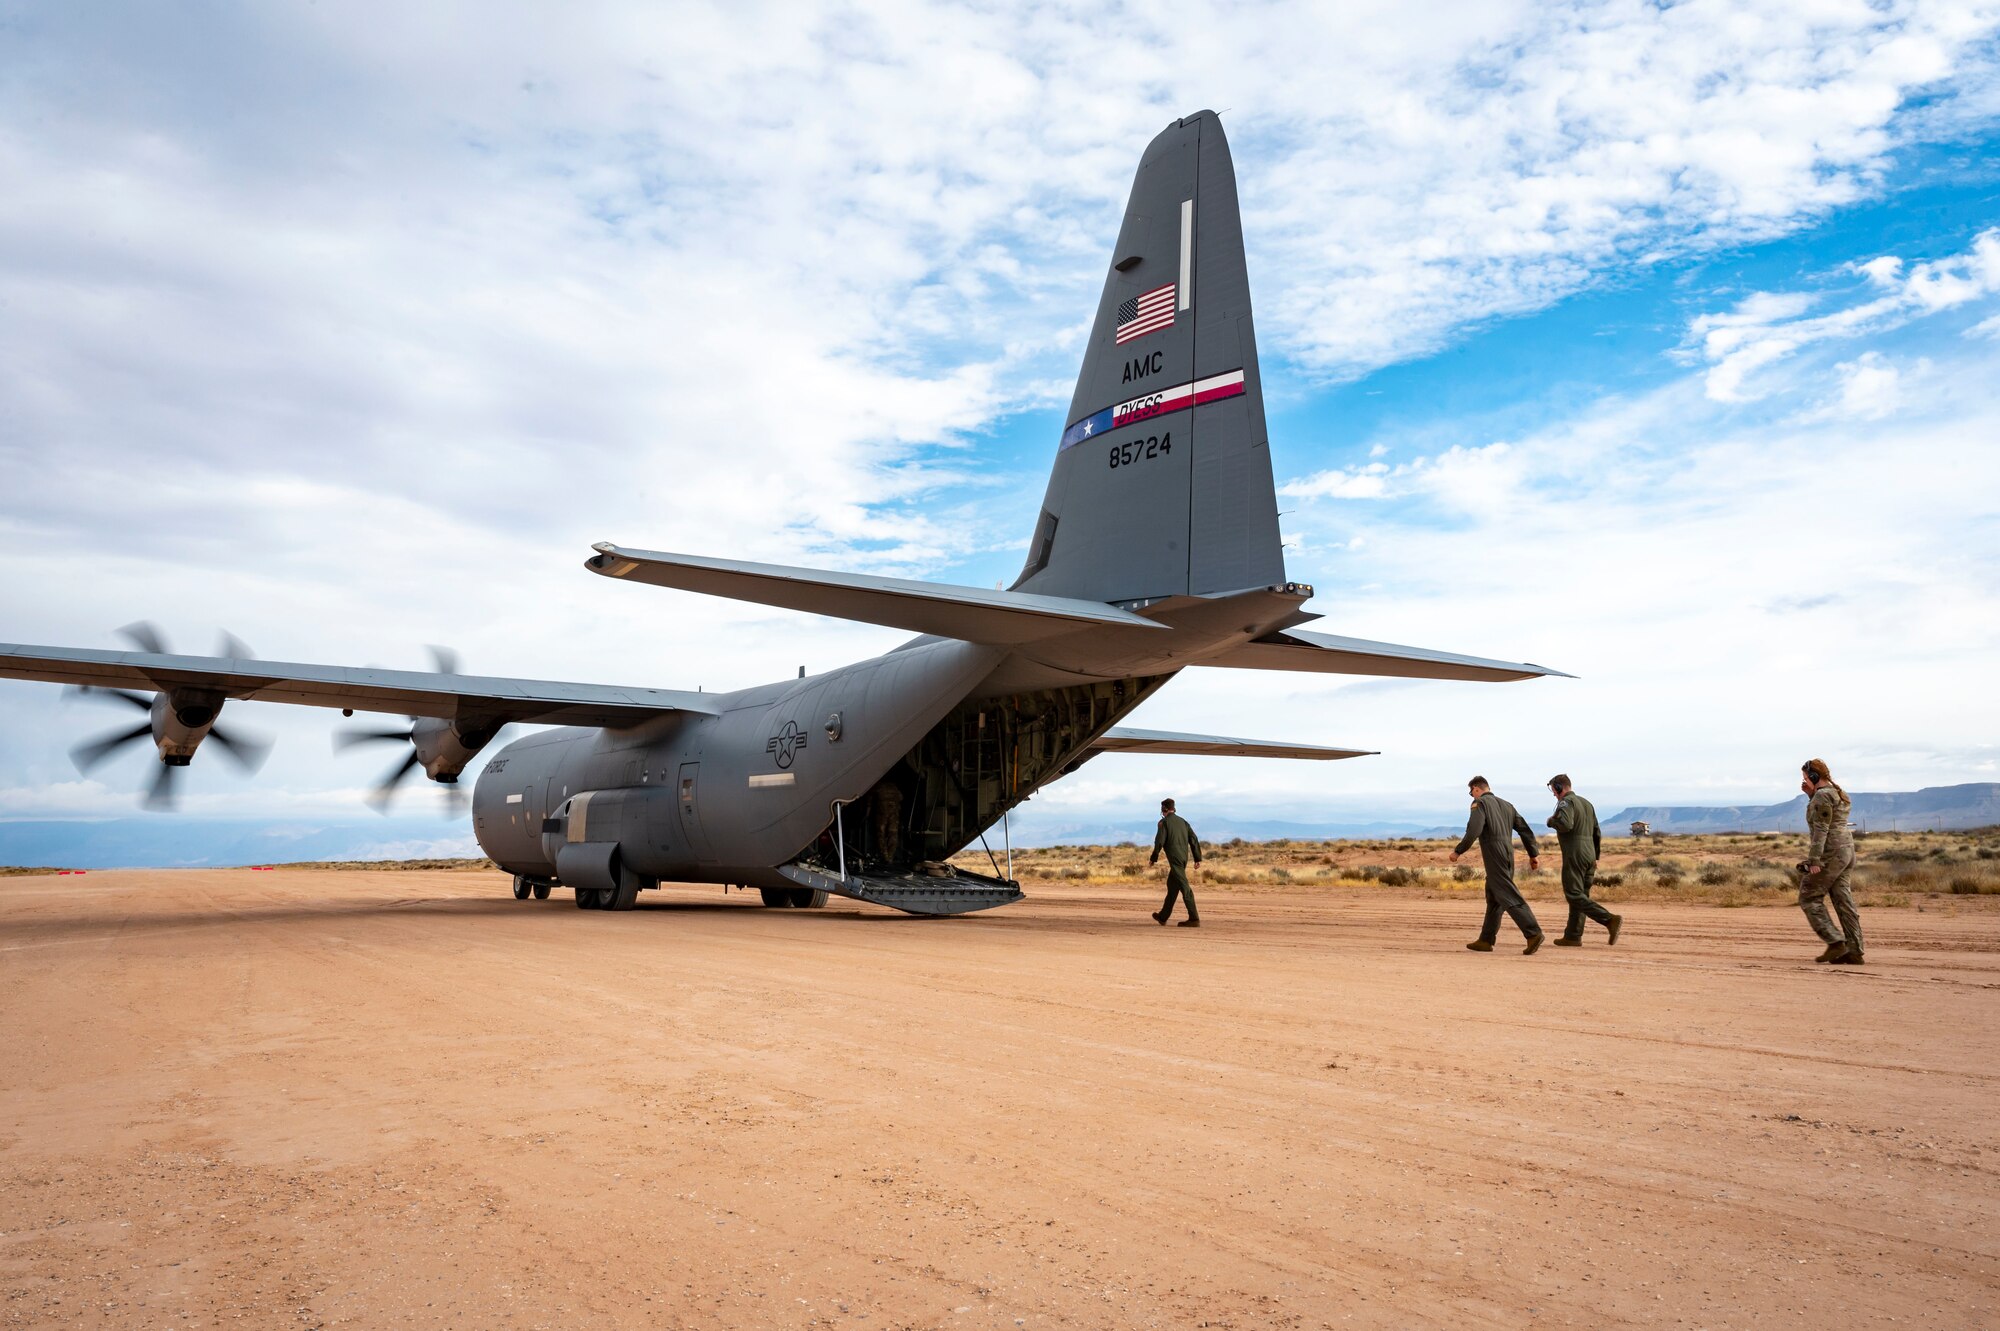 U.S. Airmen from the 40th Airlift Squadron board a C-130J Super Hercules for take off after simulating refueling from a M1A2 Abrams tank at Fort Bliss, Texas, Dec. 9, 2022. Dyess Air Force Base and Fort Bliss conducted a joint dry run to assess feasibility, equipment familiarization, and rehearsal of fueling operations. (U.S. Air Force photo by Senior Airman Leon Redfern)